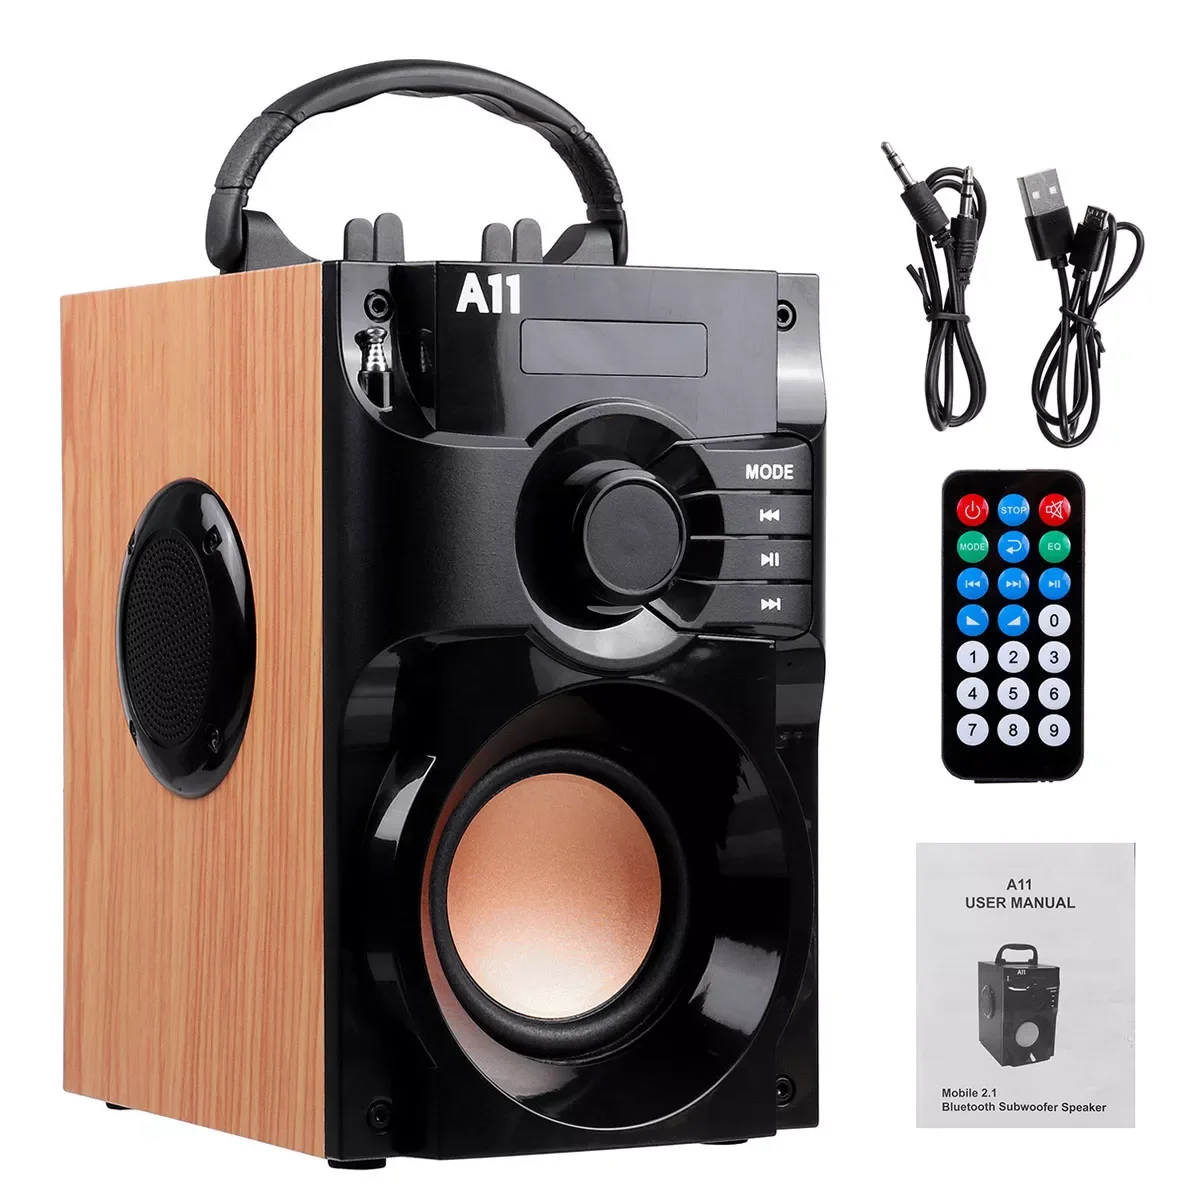 Enlarge Bass bluetooth Speakers Portable Column High Power 3D Stereo Subwoofer Music Center Support AUX TF FM Radio HIFI Boombox